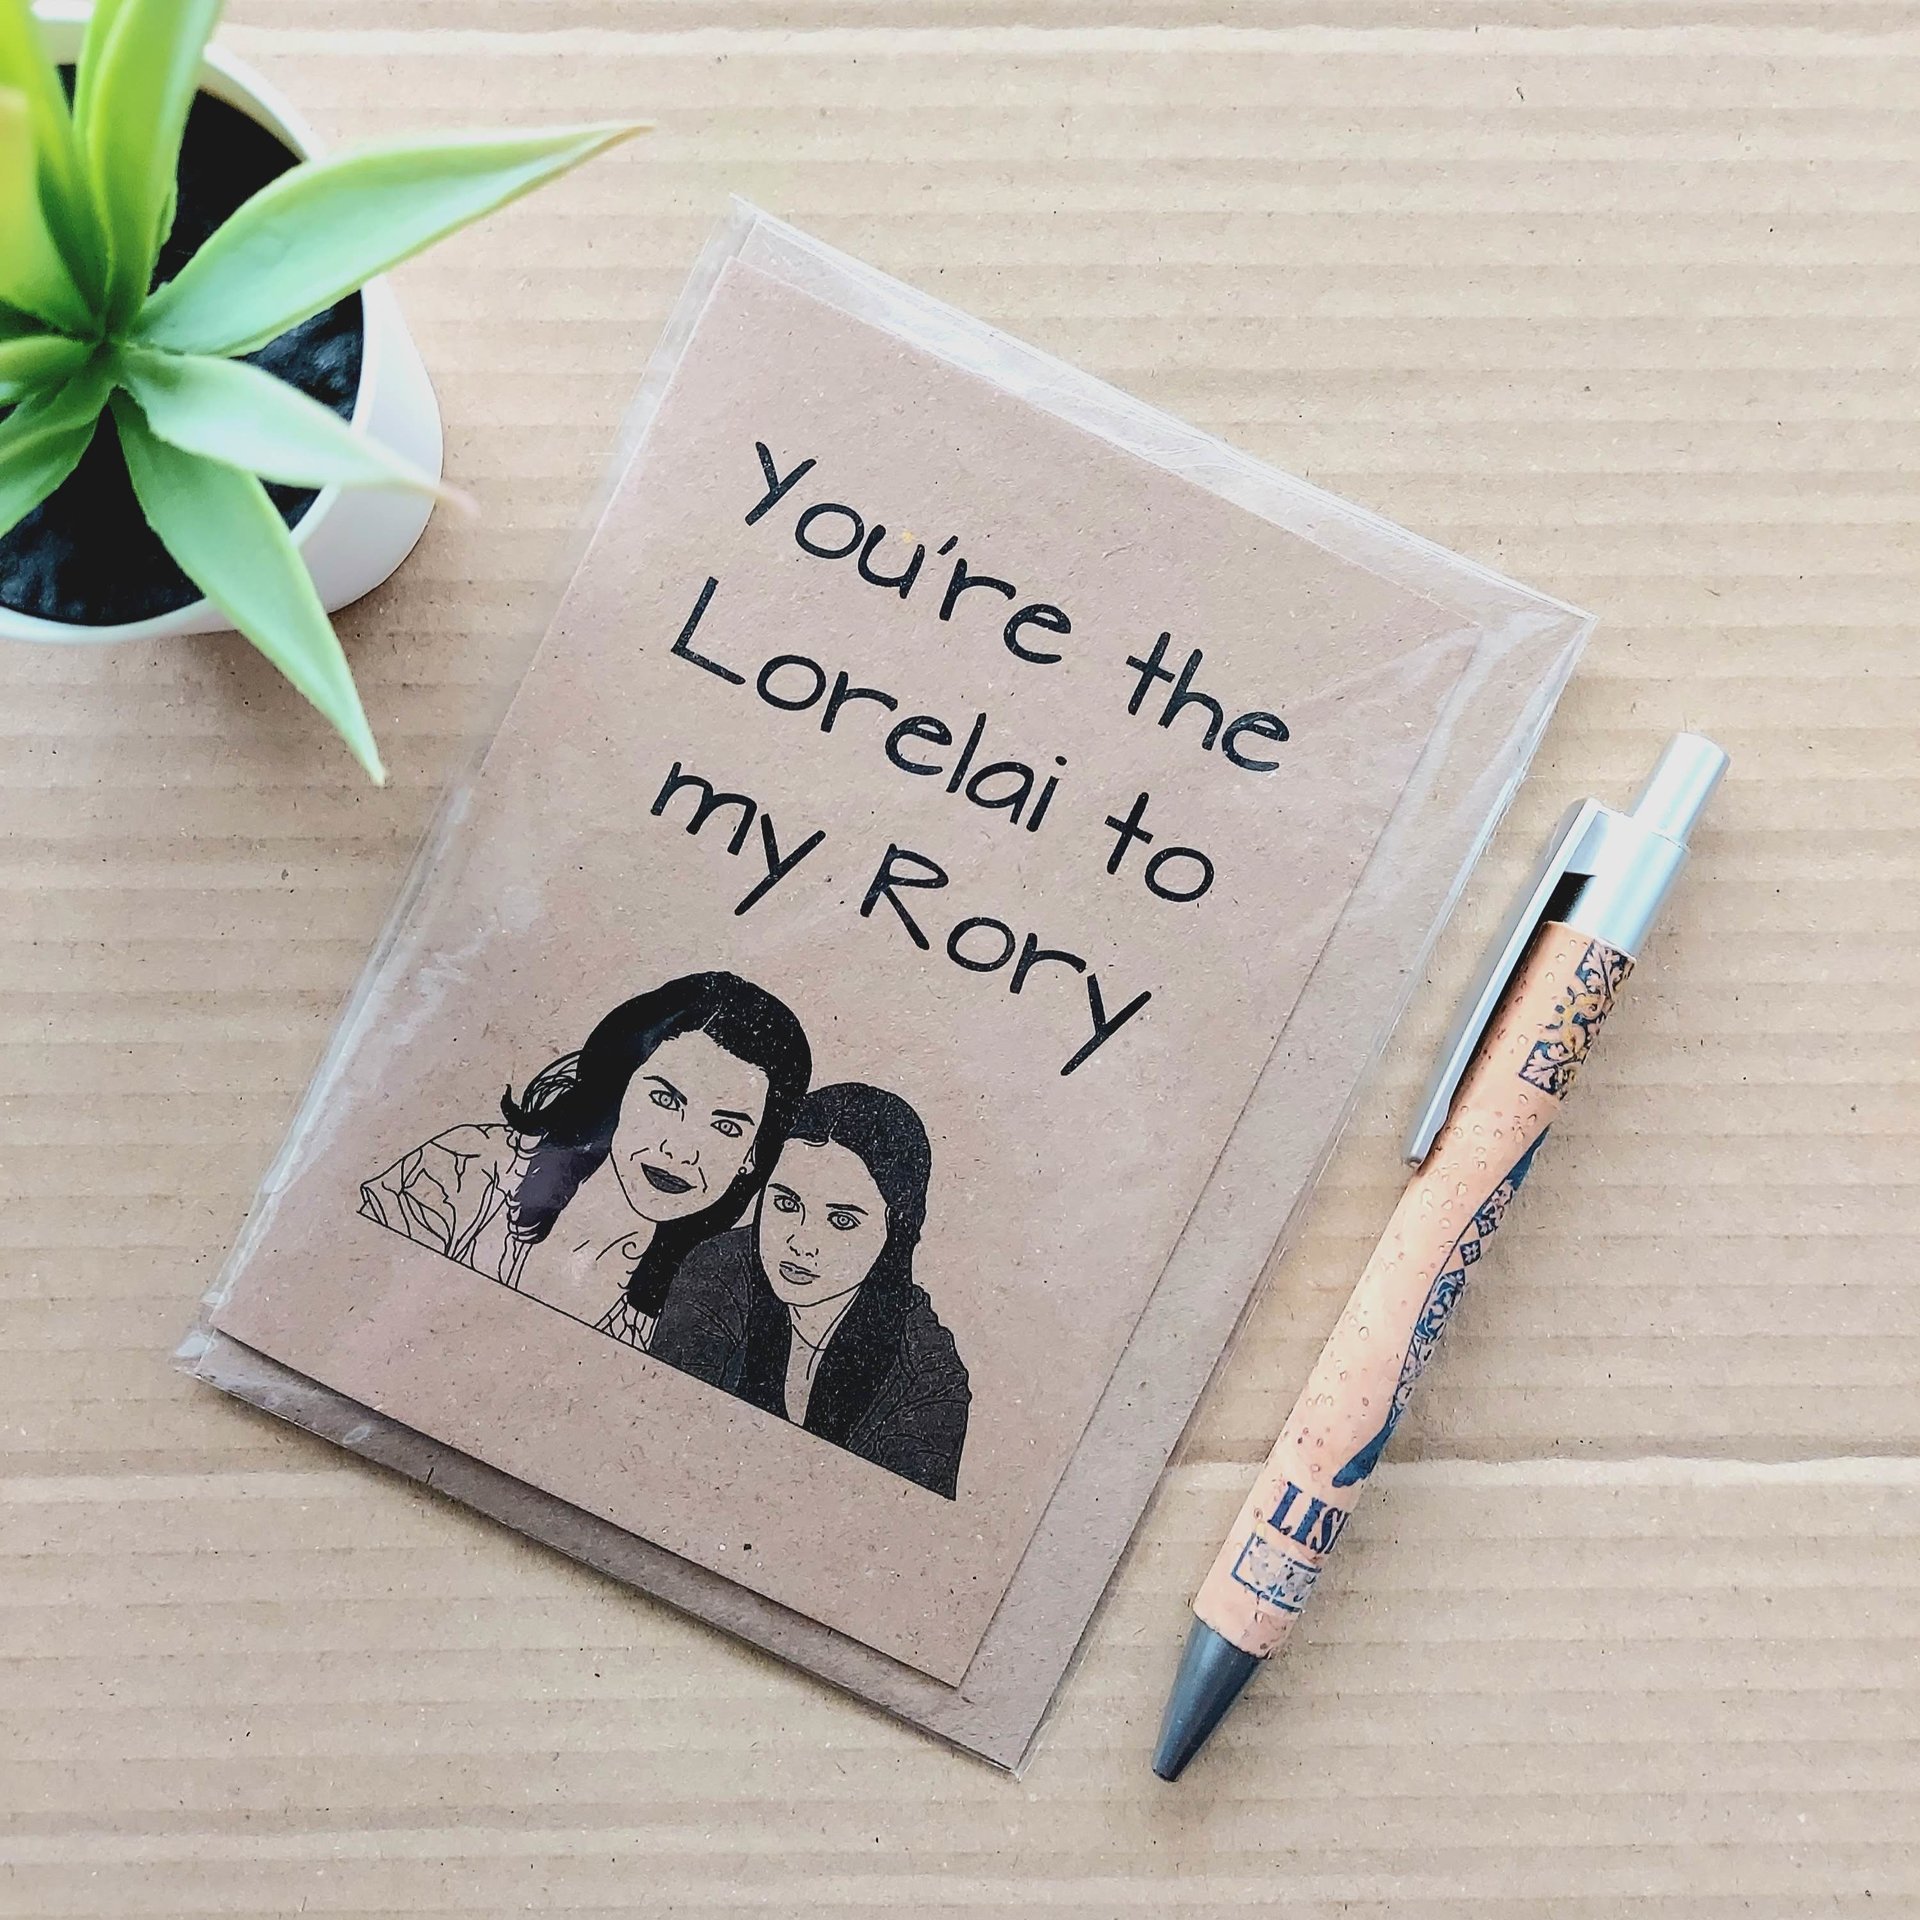 Gilmore Girls Mum Card - You're the Lorelai to my Rory, mothers day card, gilmore girls